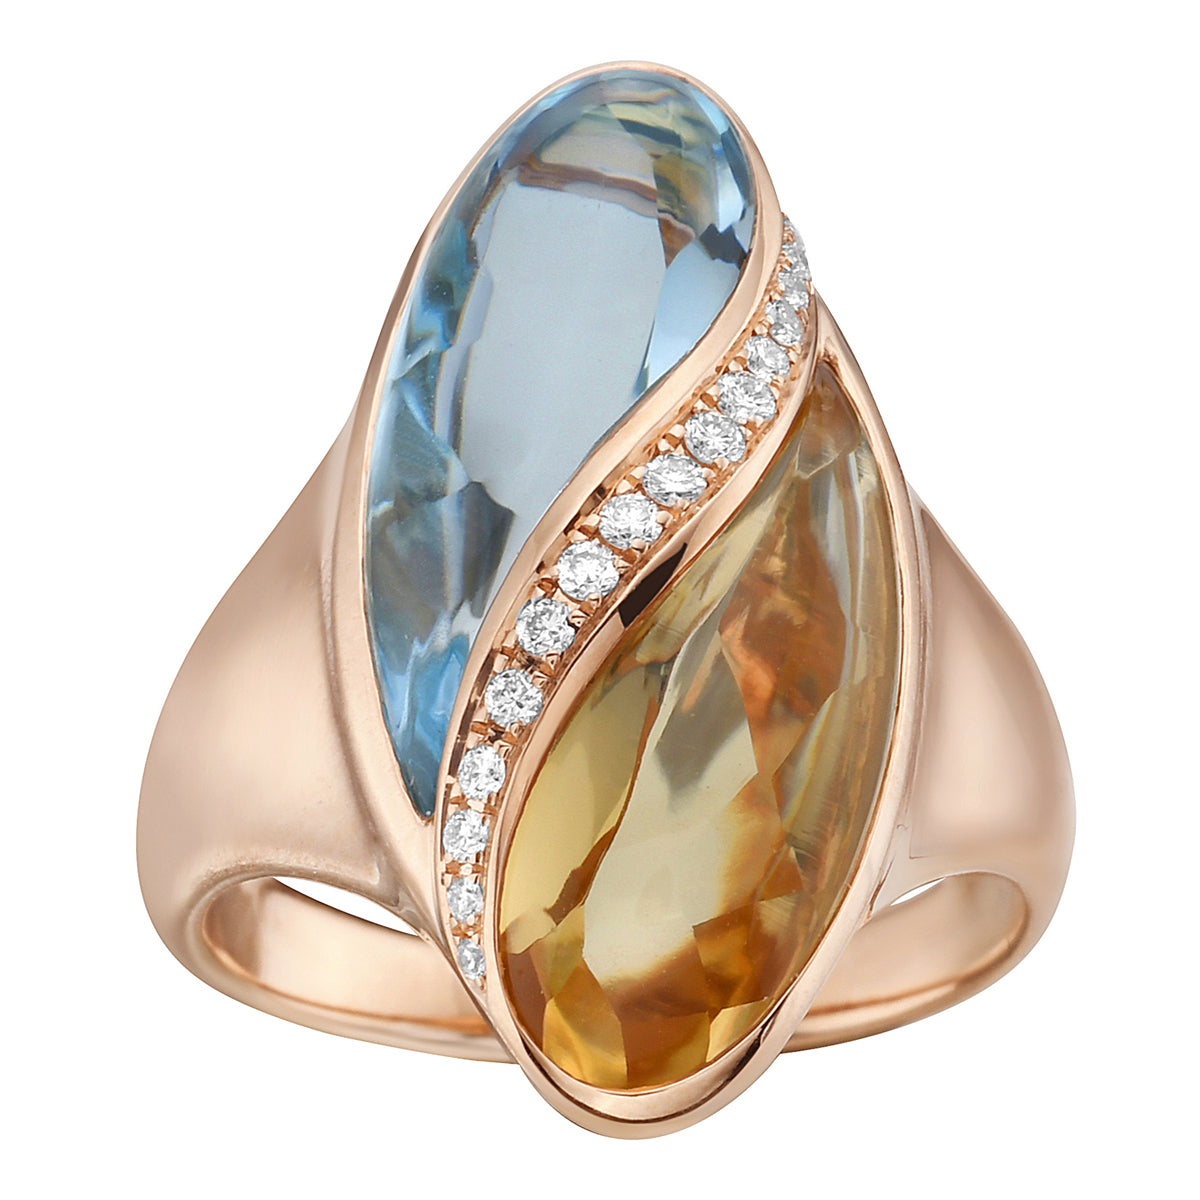 RING 18KR-6.58G 16D-0.10CT 1BT-4.54CT 1CIT-3.04CT BLUE TOPAZ AND CITRIN